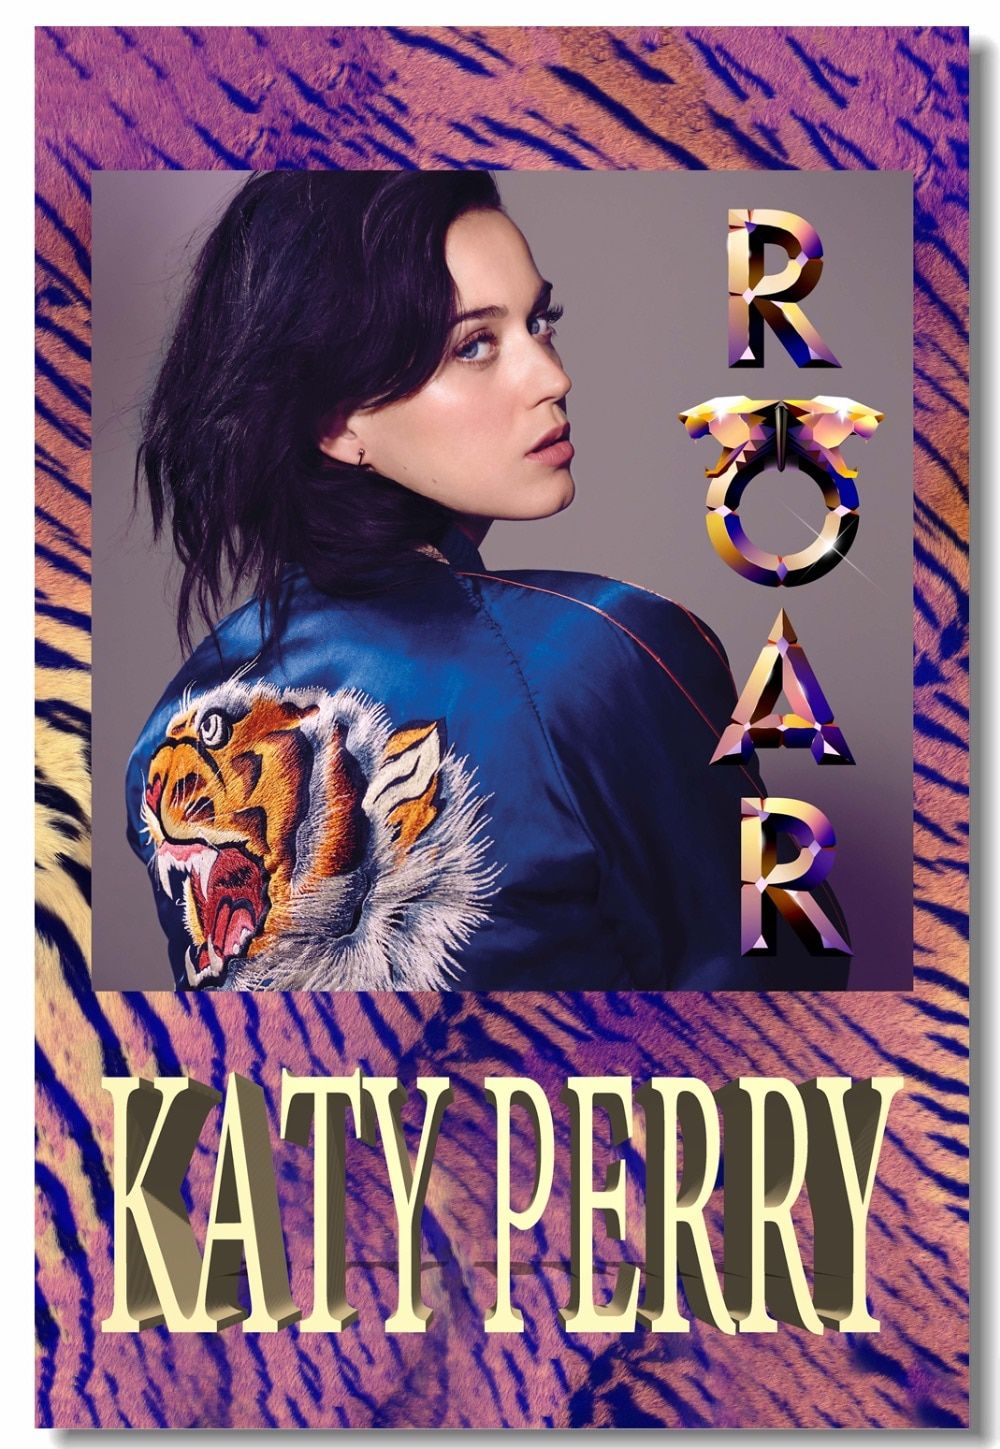 Custom Canvas Wall Decals Katy Perry Poster Katy Perry Roar Wallpaper Music Star Wall Sticker Mural Cafe Decorations #. Wall Stickers